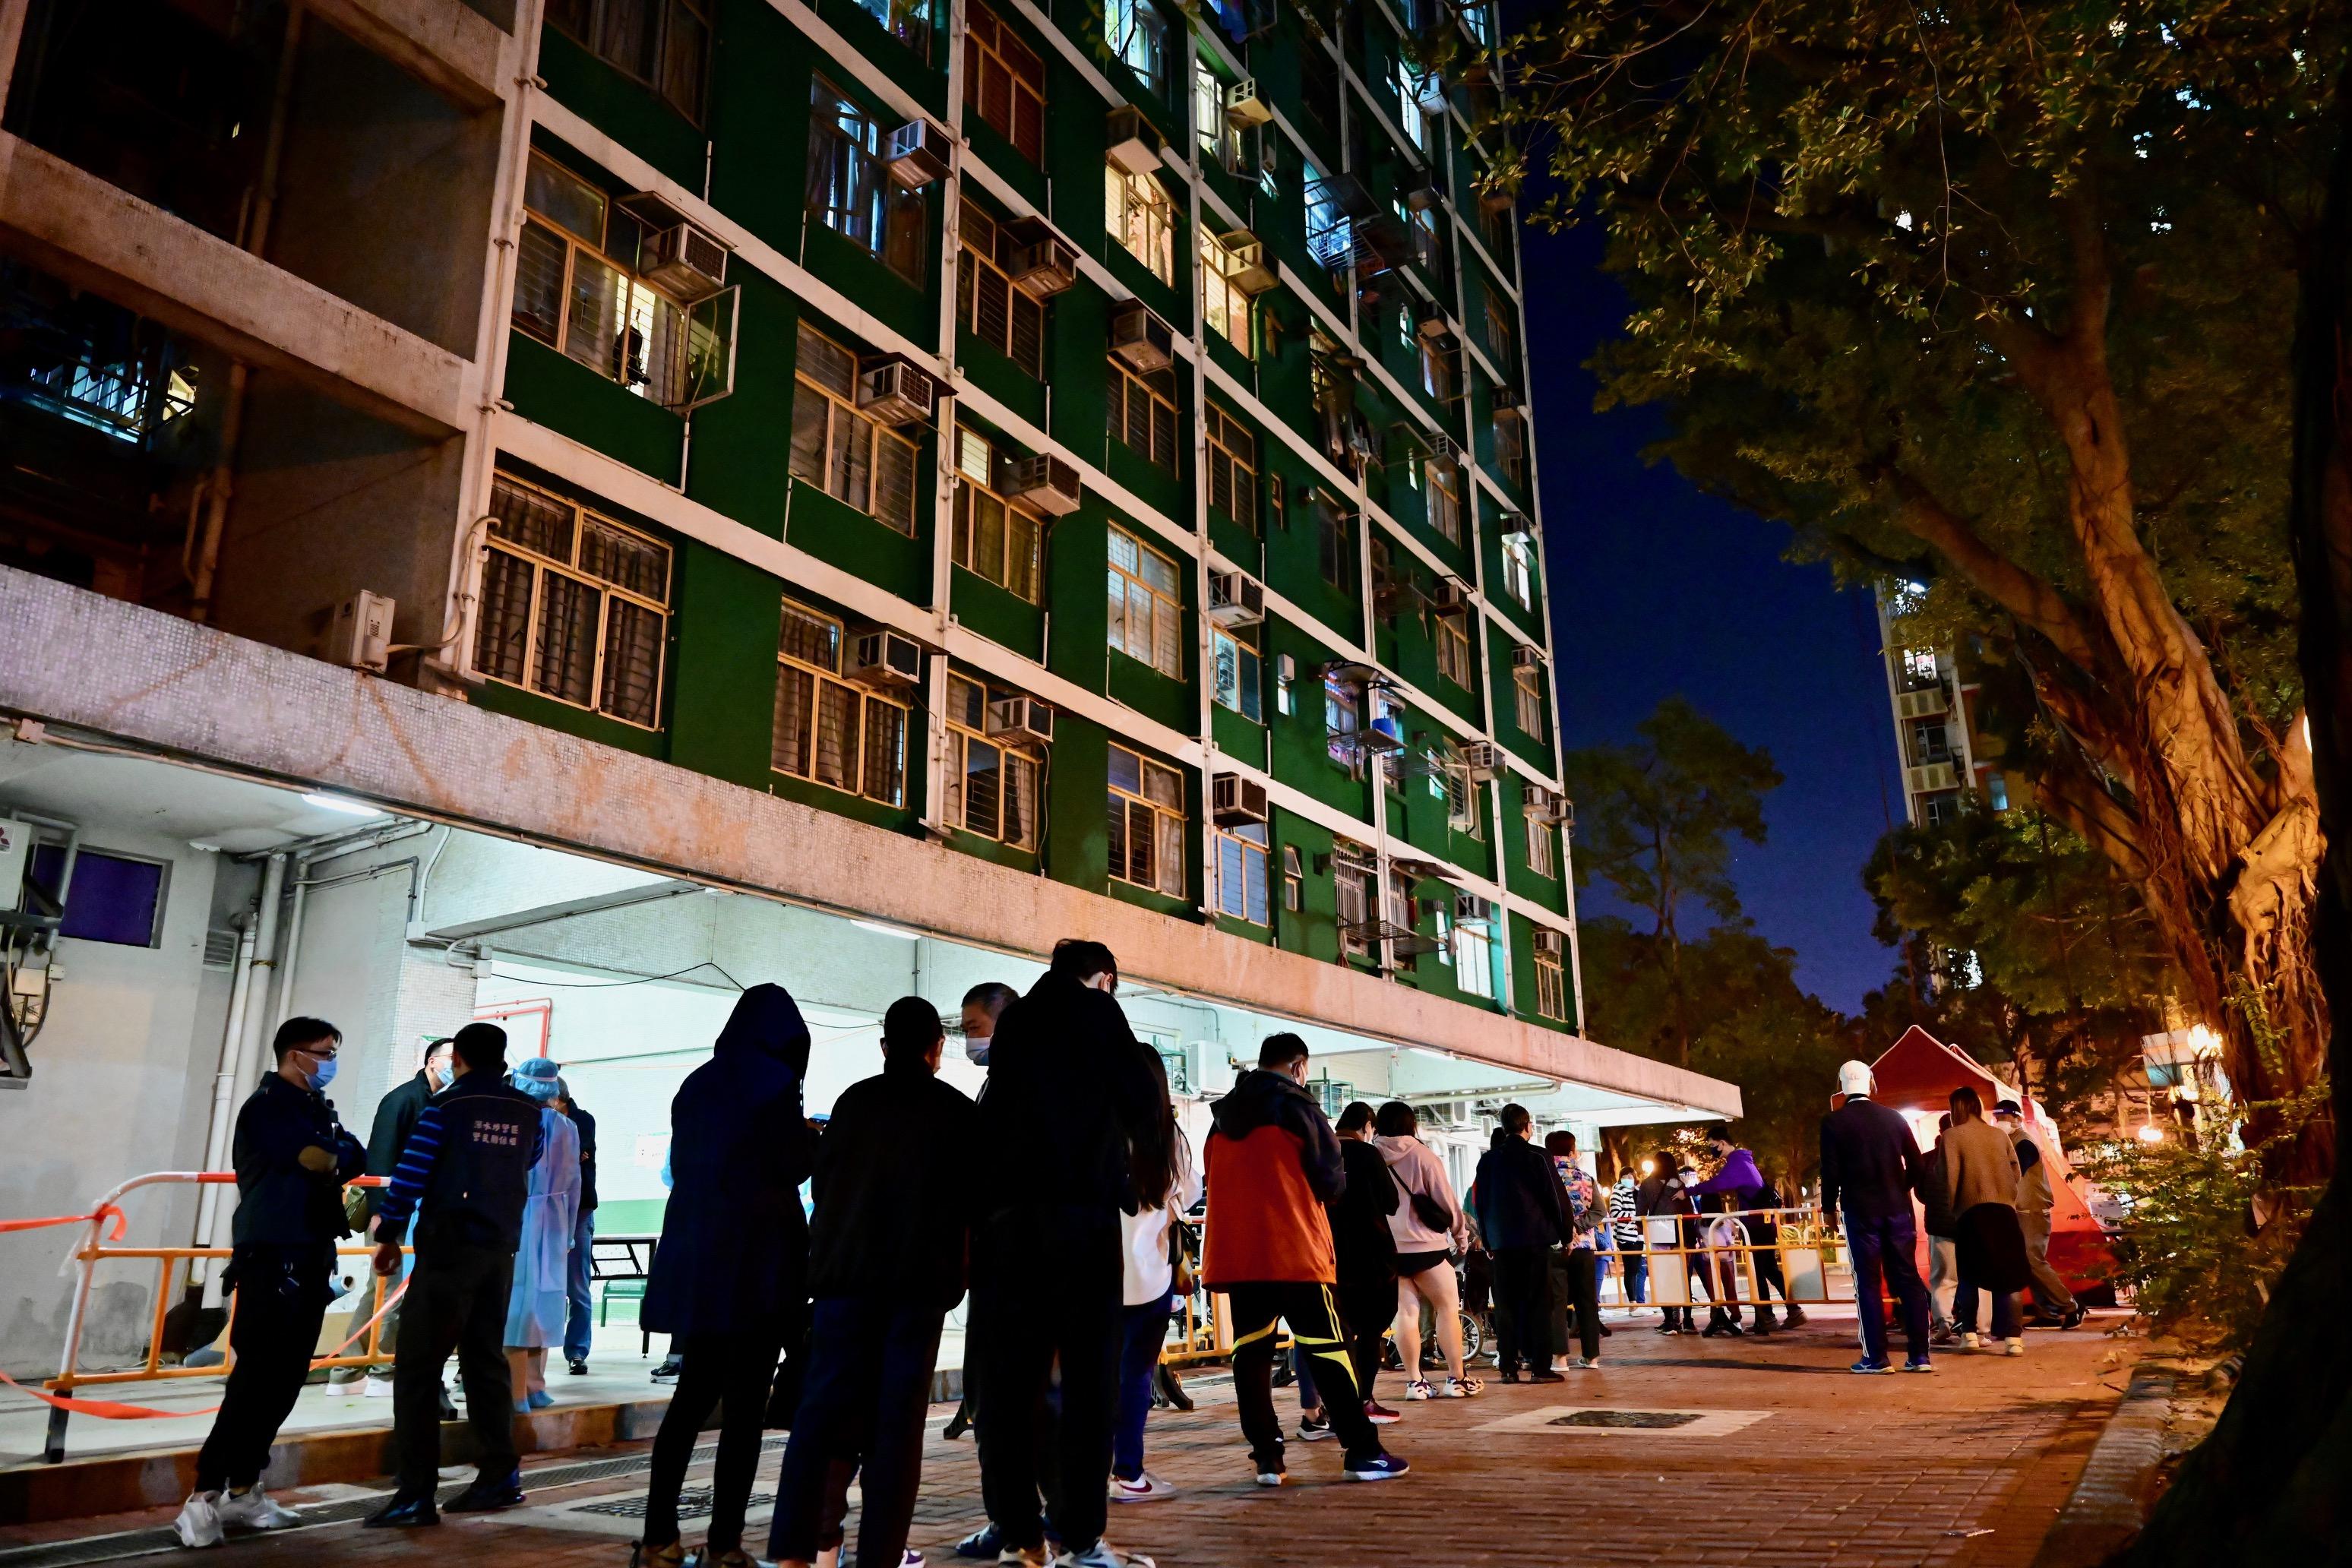 The Government yesterday (January 15) made a "restriction-testing declaration" and issued a compulsory testing notice in respect of the specified "restricted area" in Sham Shui Po (i.e. Tung Moon House, Tai Hang Tung Estate, 83 Tai Hang Tung Road, Sham Shui Po), under which people within the specified "restricted area" in Sham Shui Po were required to stay in their premises and undergo compulsory testing. Photo shows staff members of the Housing Department assisting the affected persons to register for testing.
